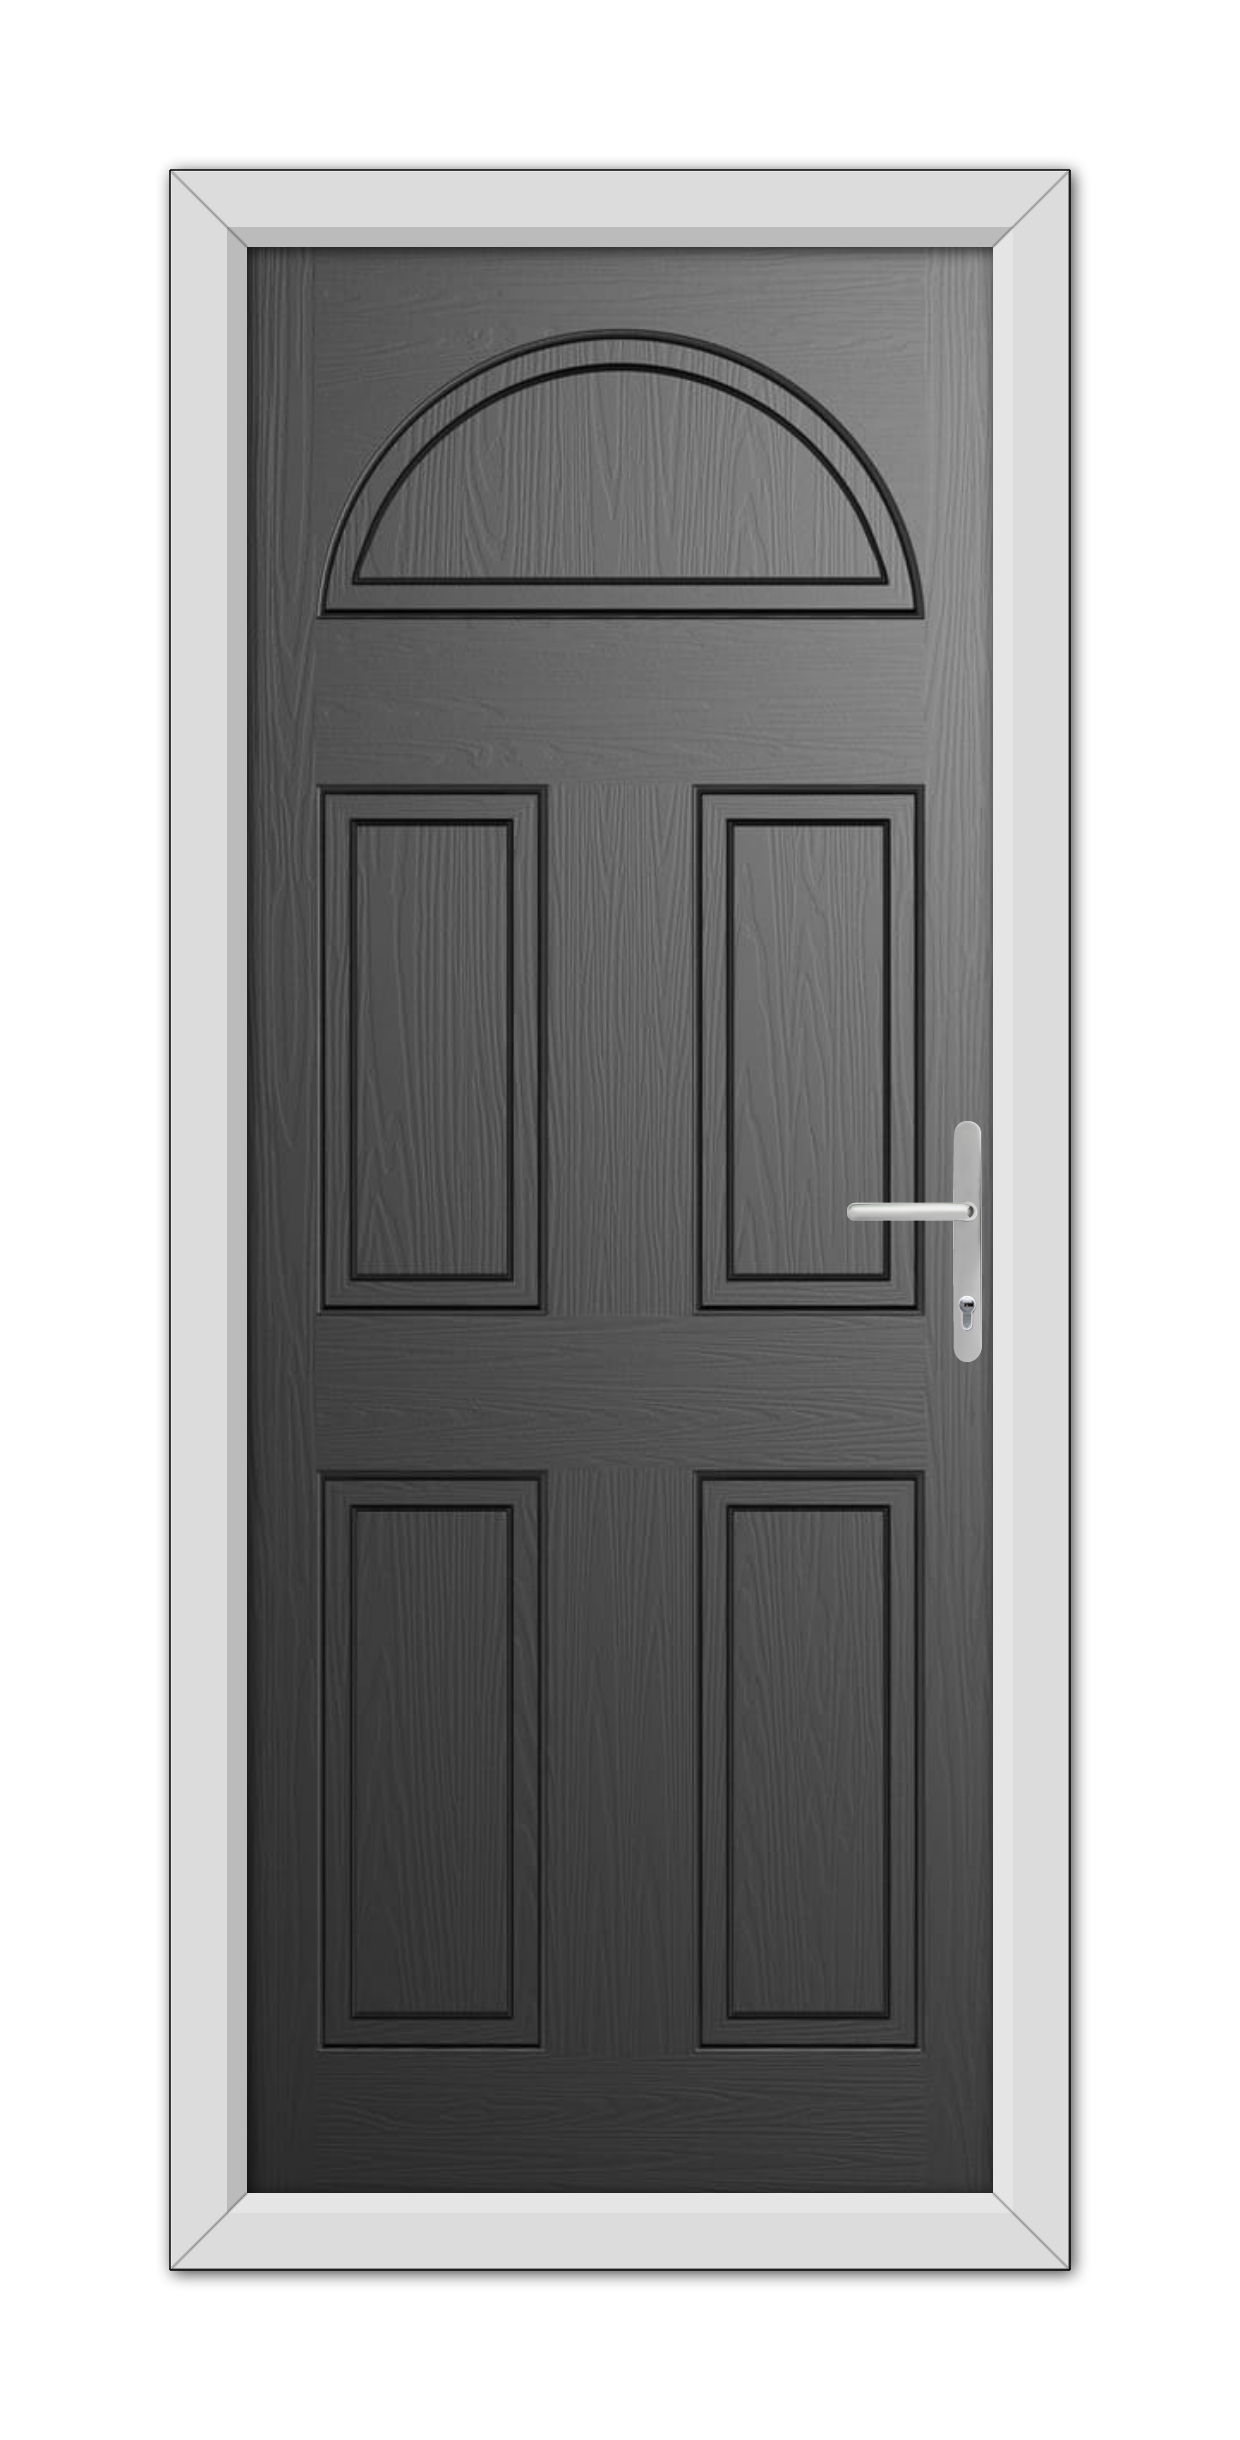 A Black Winslow Solid Composite Door 48mm Timber Core with six panels and a semi-circular window at the top, featuring a metal handle on the right side.